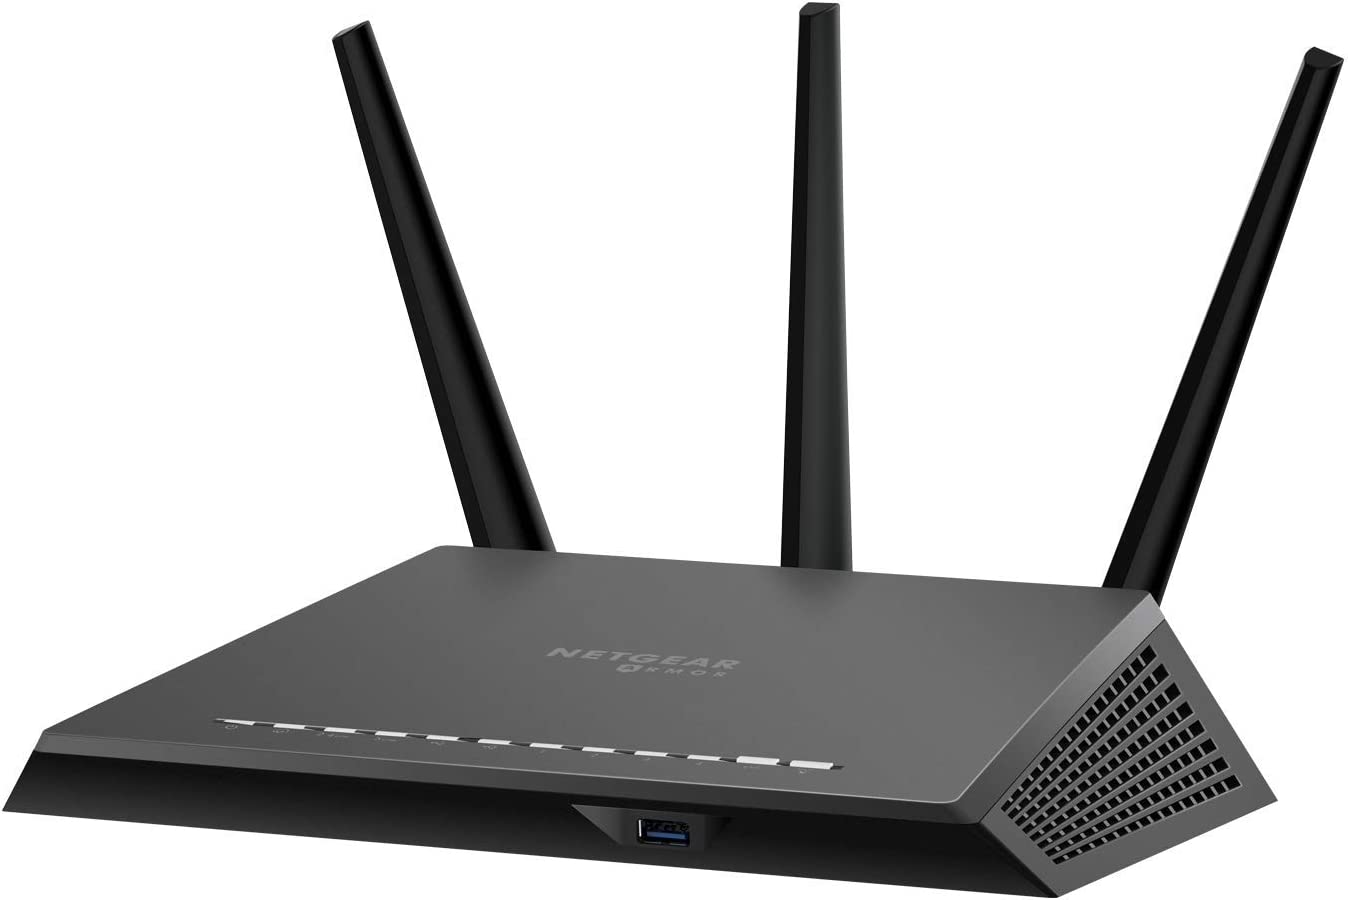 NETGEAR Nighthawk Smart WiFi Router (RS400) - AC2300 Wireless Speed (up to 2300 Mbps) | Up to 2000 sq ft Coverage & 35 Devices | 4 x 1G Ethernet and 2 USB Ports | Includes 3 Years of Armor Security